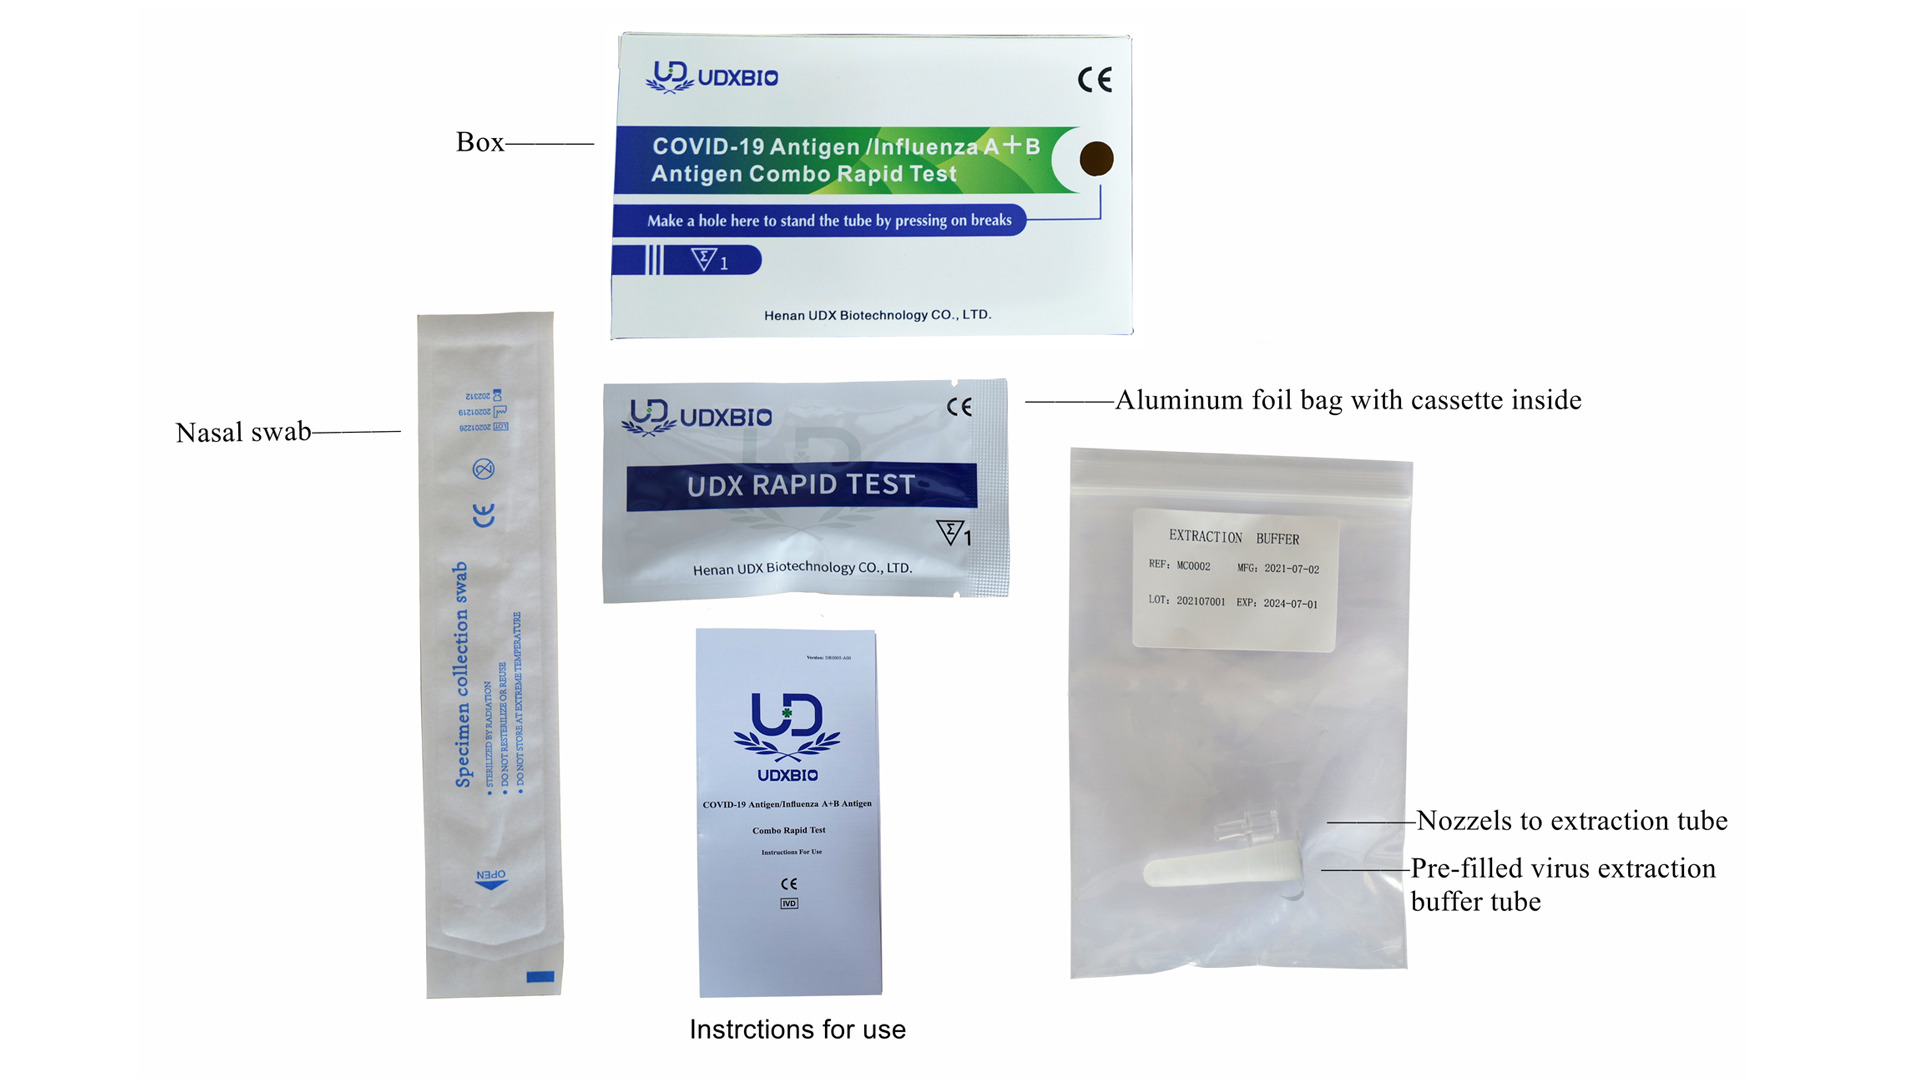 COVID-19 Antigen/Influenza A+B Antigen Combo Rapid Test: Rapid Diagnosis of Viral Infections